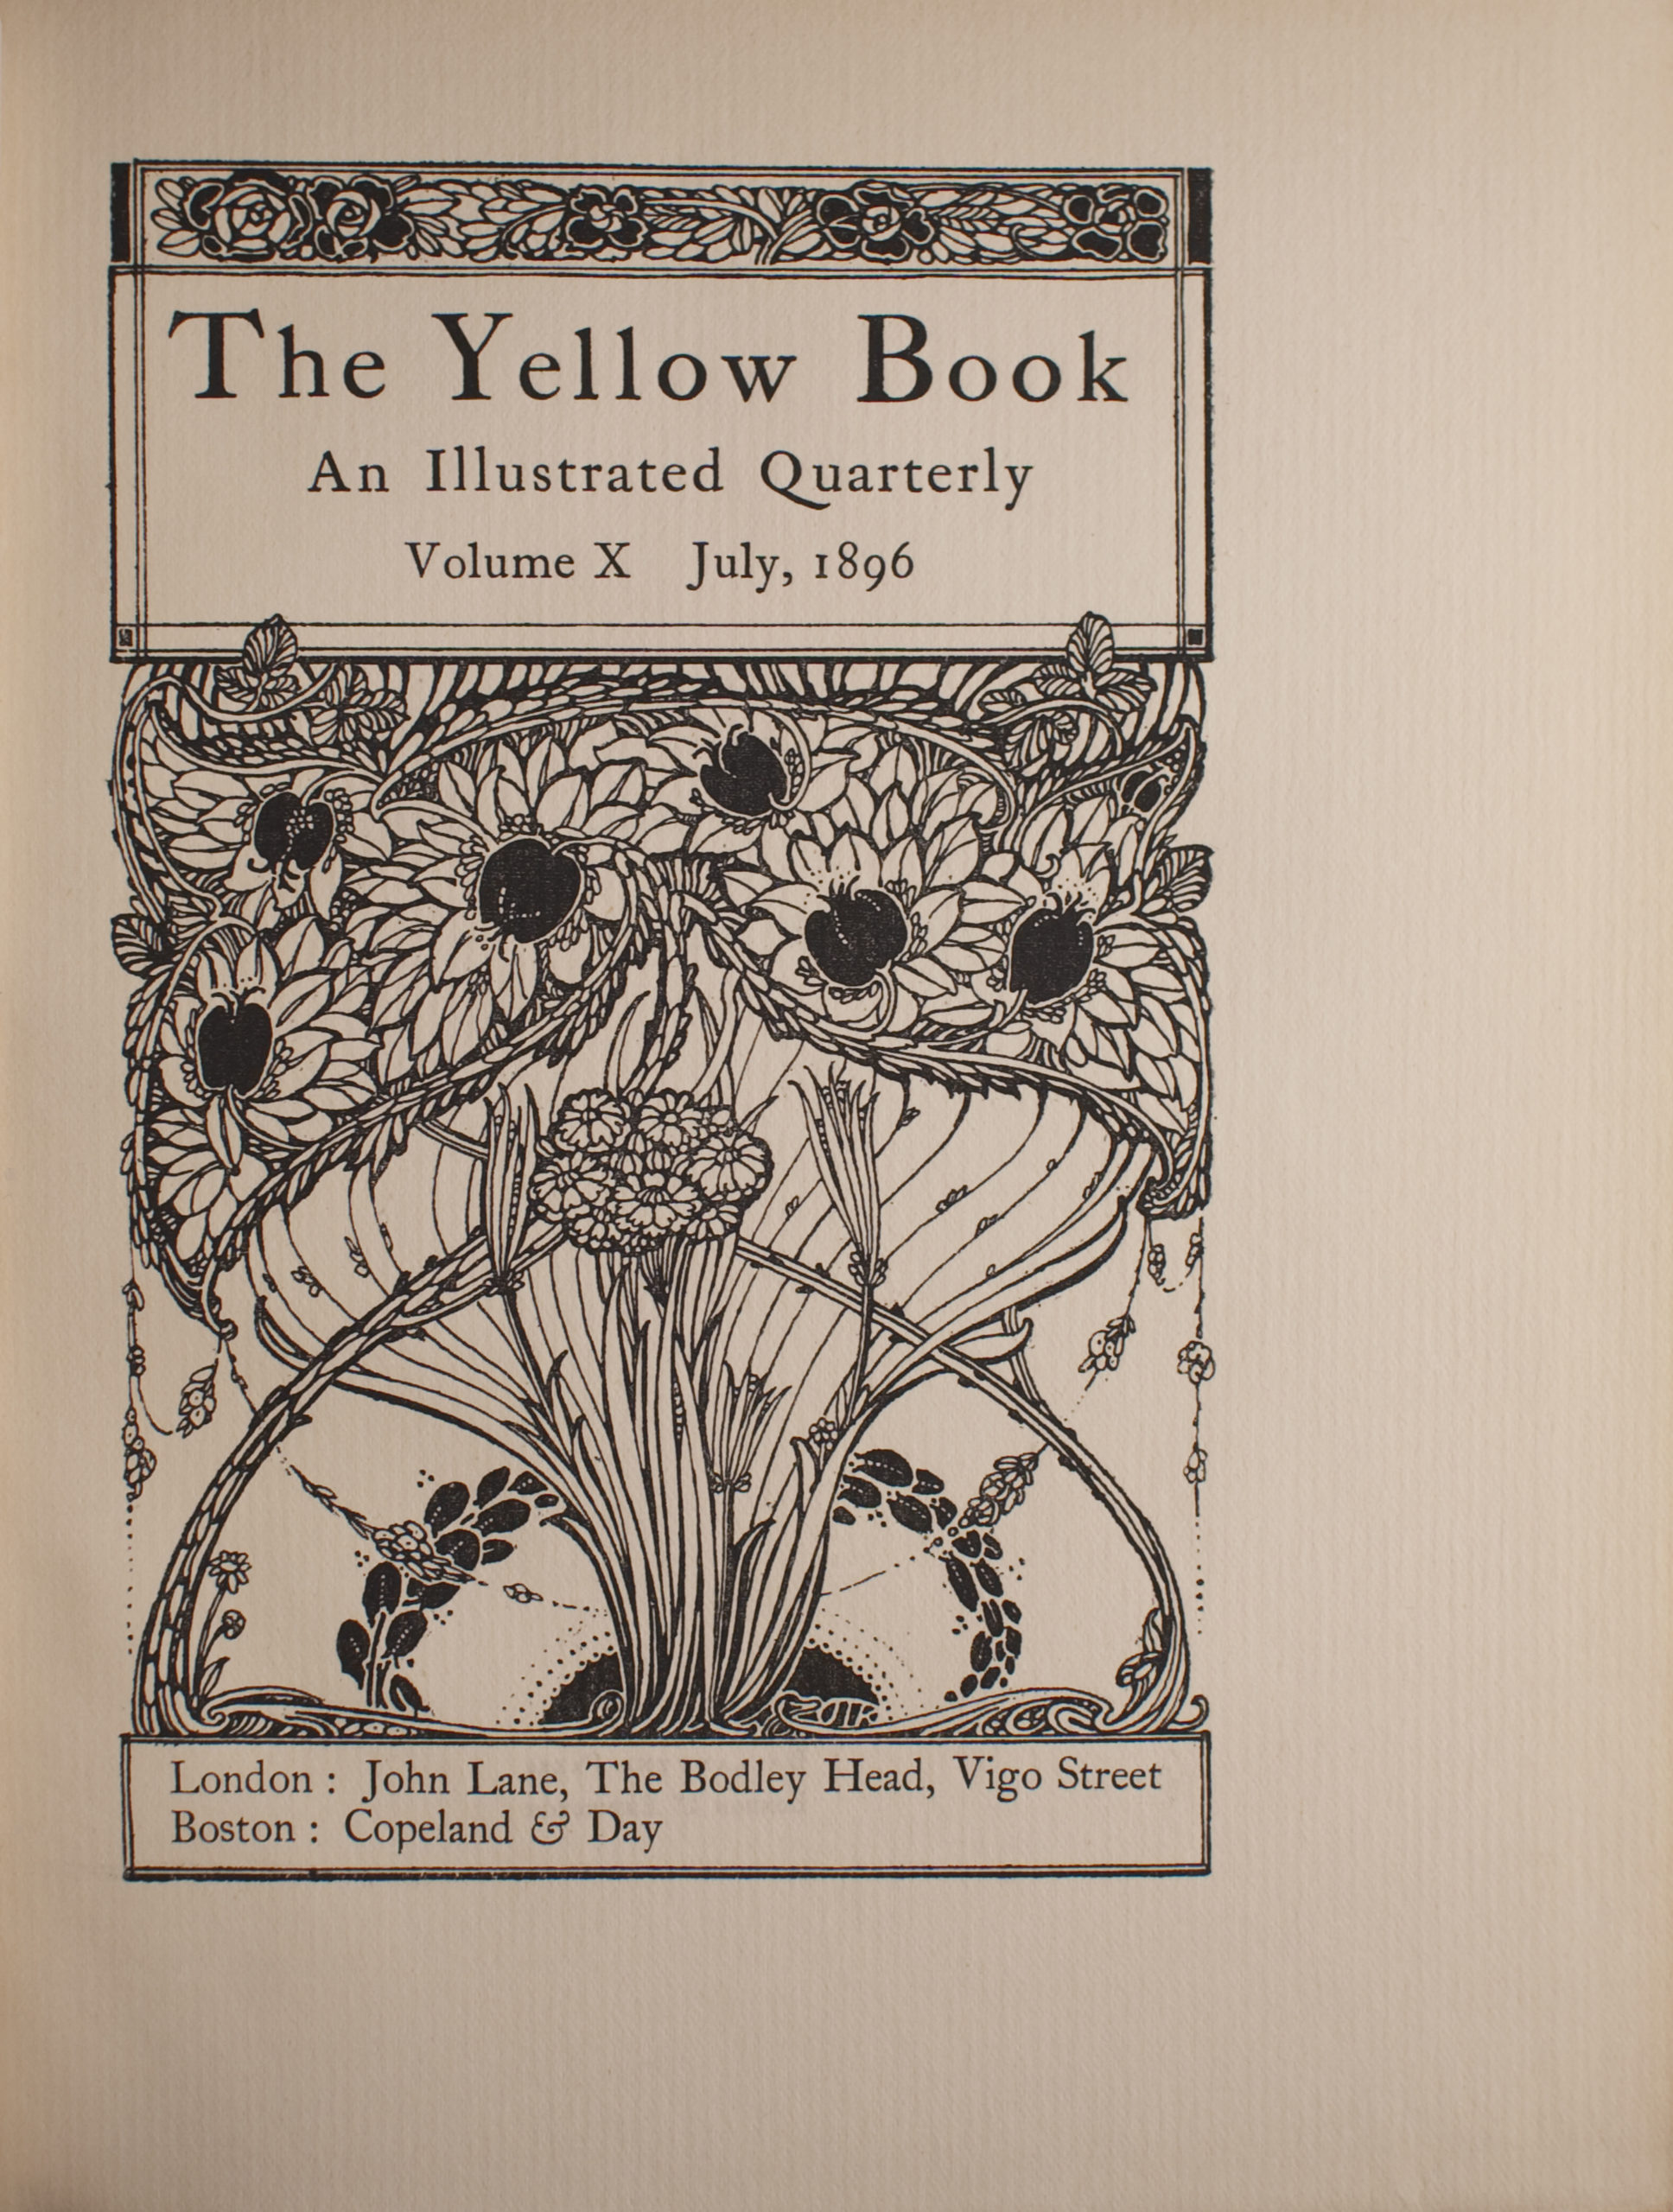 Image is a decorative frame around the publication details There is a decorative frieze of roses at the top of the image just above a banner if text The Yellow Book | An Illustrated Quarterly | Volume X July 1896 Most of page is filled with long-stemmed stylized sunflowers with pomegranate centres Just below the stems at the bottom of the image there is another text banner which is narrower than the first one and contains information on the publishers and location of publication